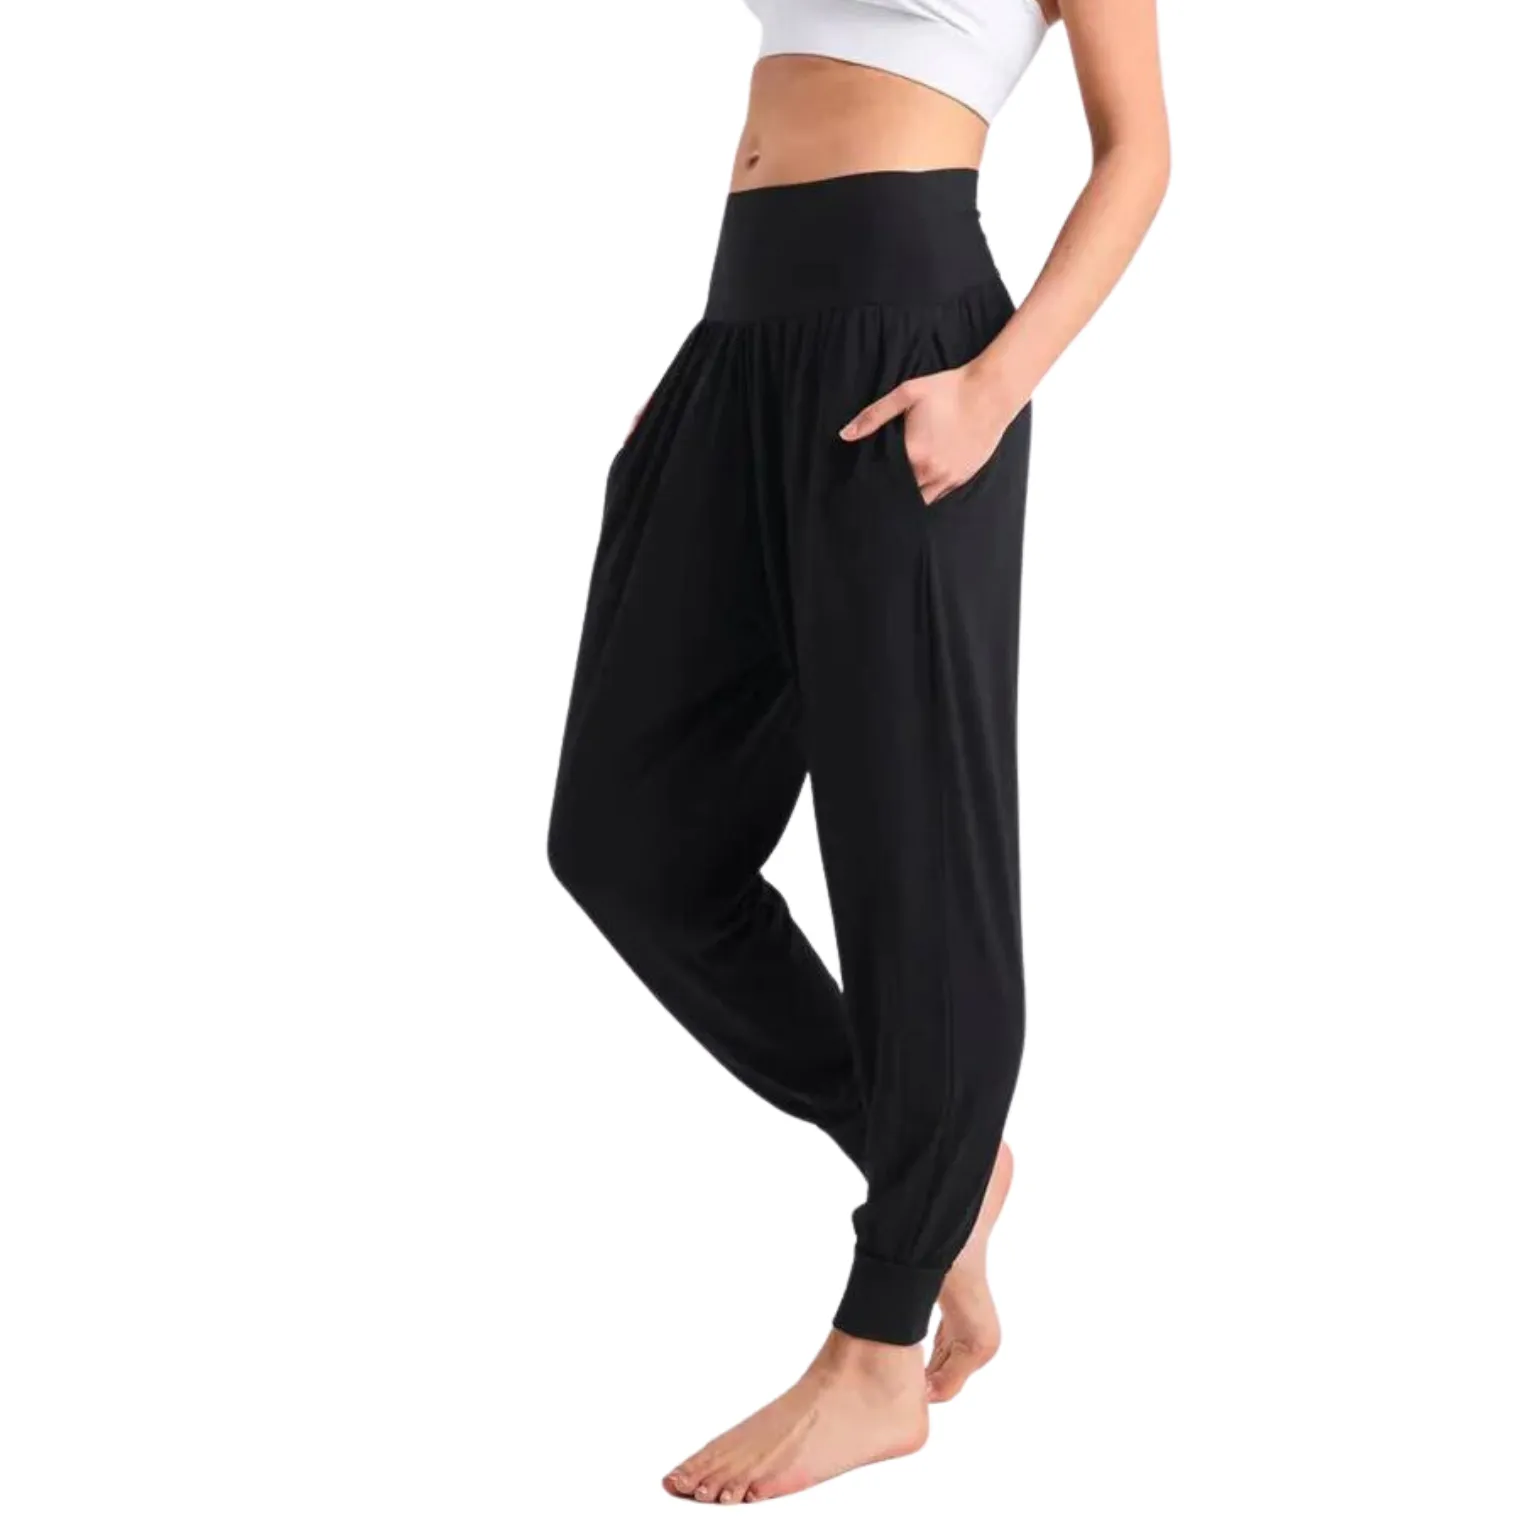 Reliable Relax Pants Manufacturing